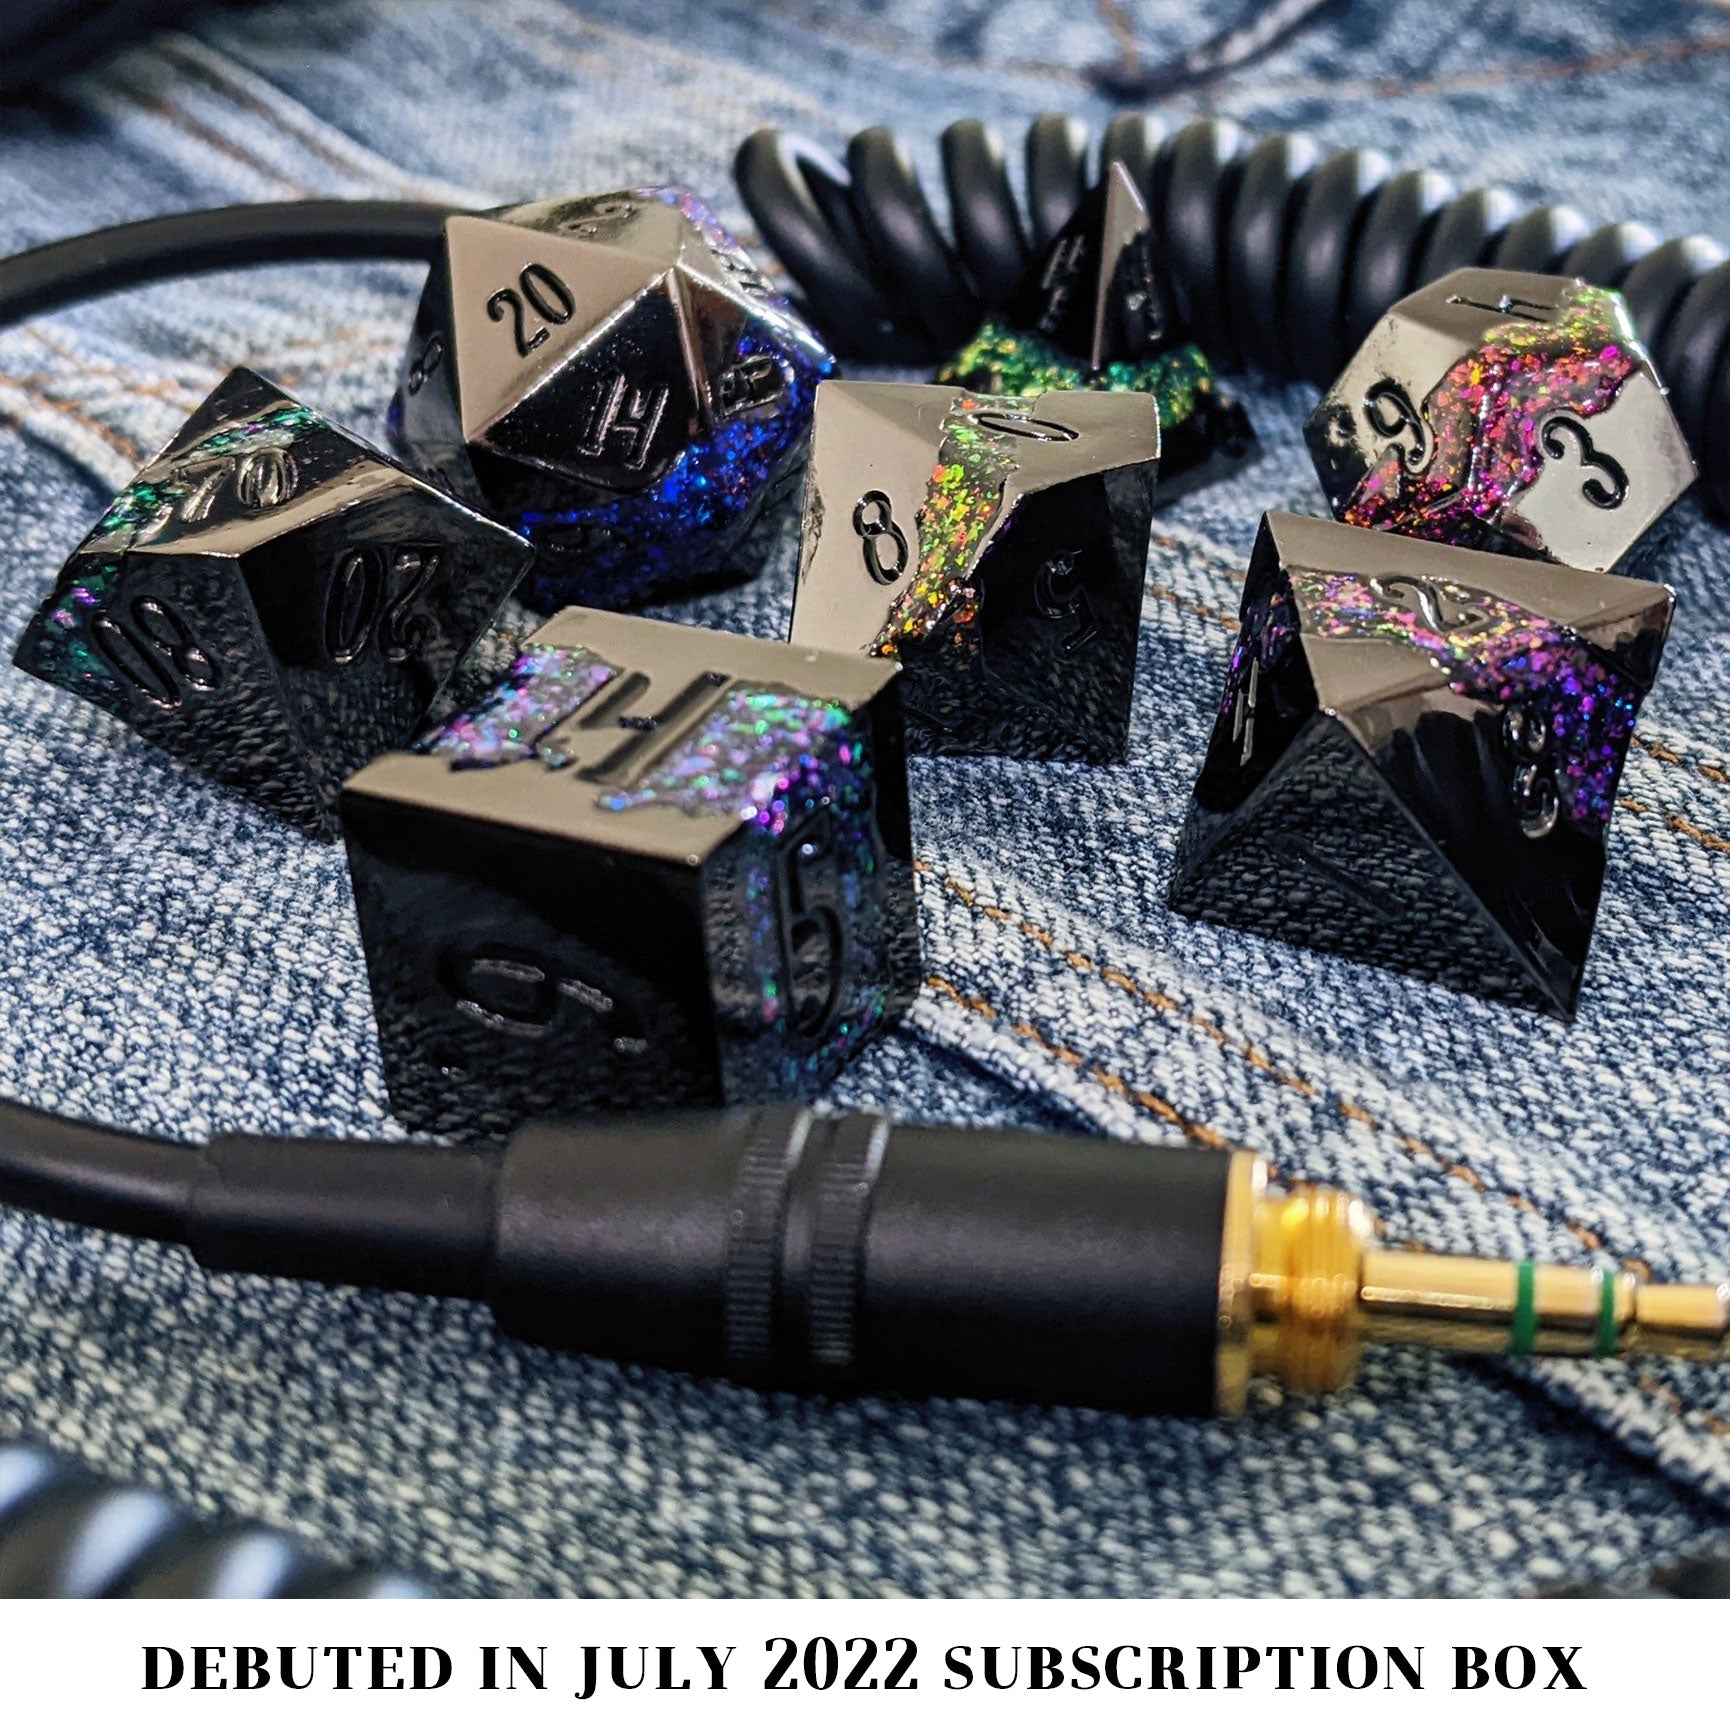 Slightly larger than our usual offerings, this metal 7-piece set is cold in your hold, the frames black like the shadow of the night, while each die has one of the colors of the rainbow set into it in glittering, vibrant enamel.